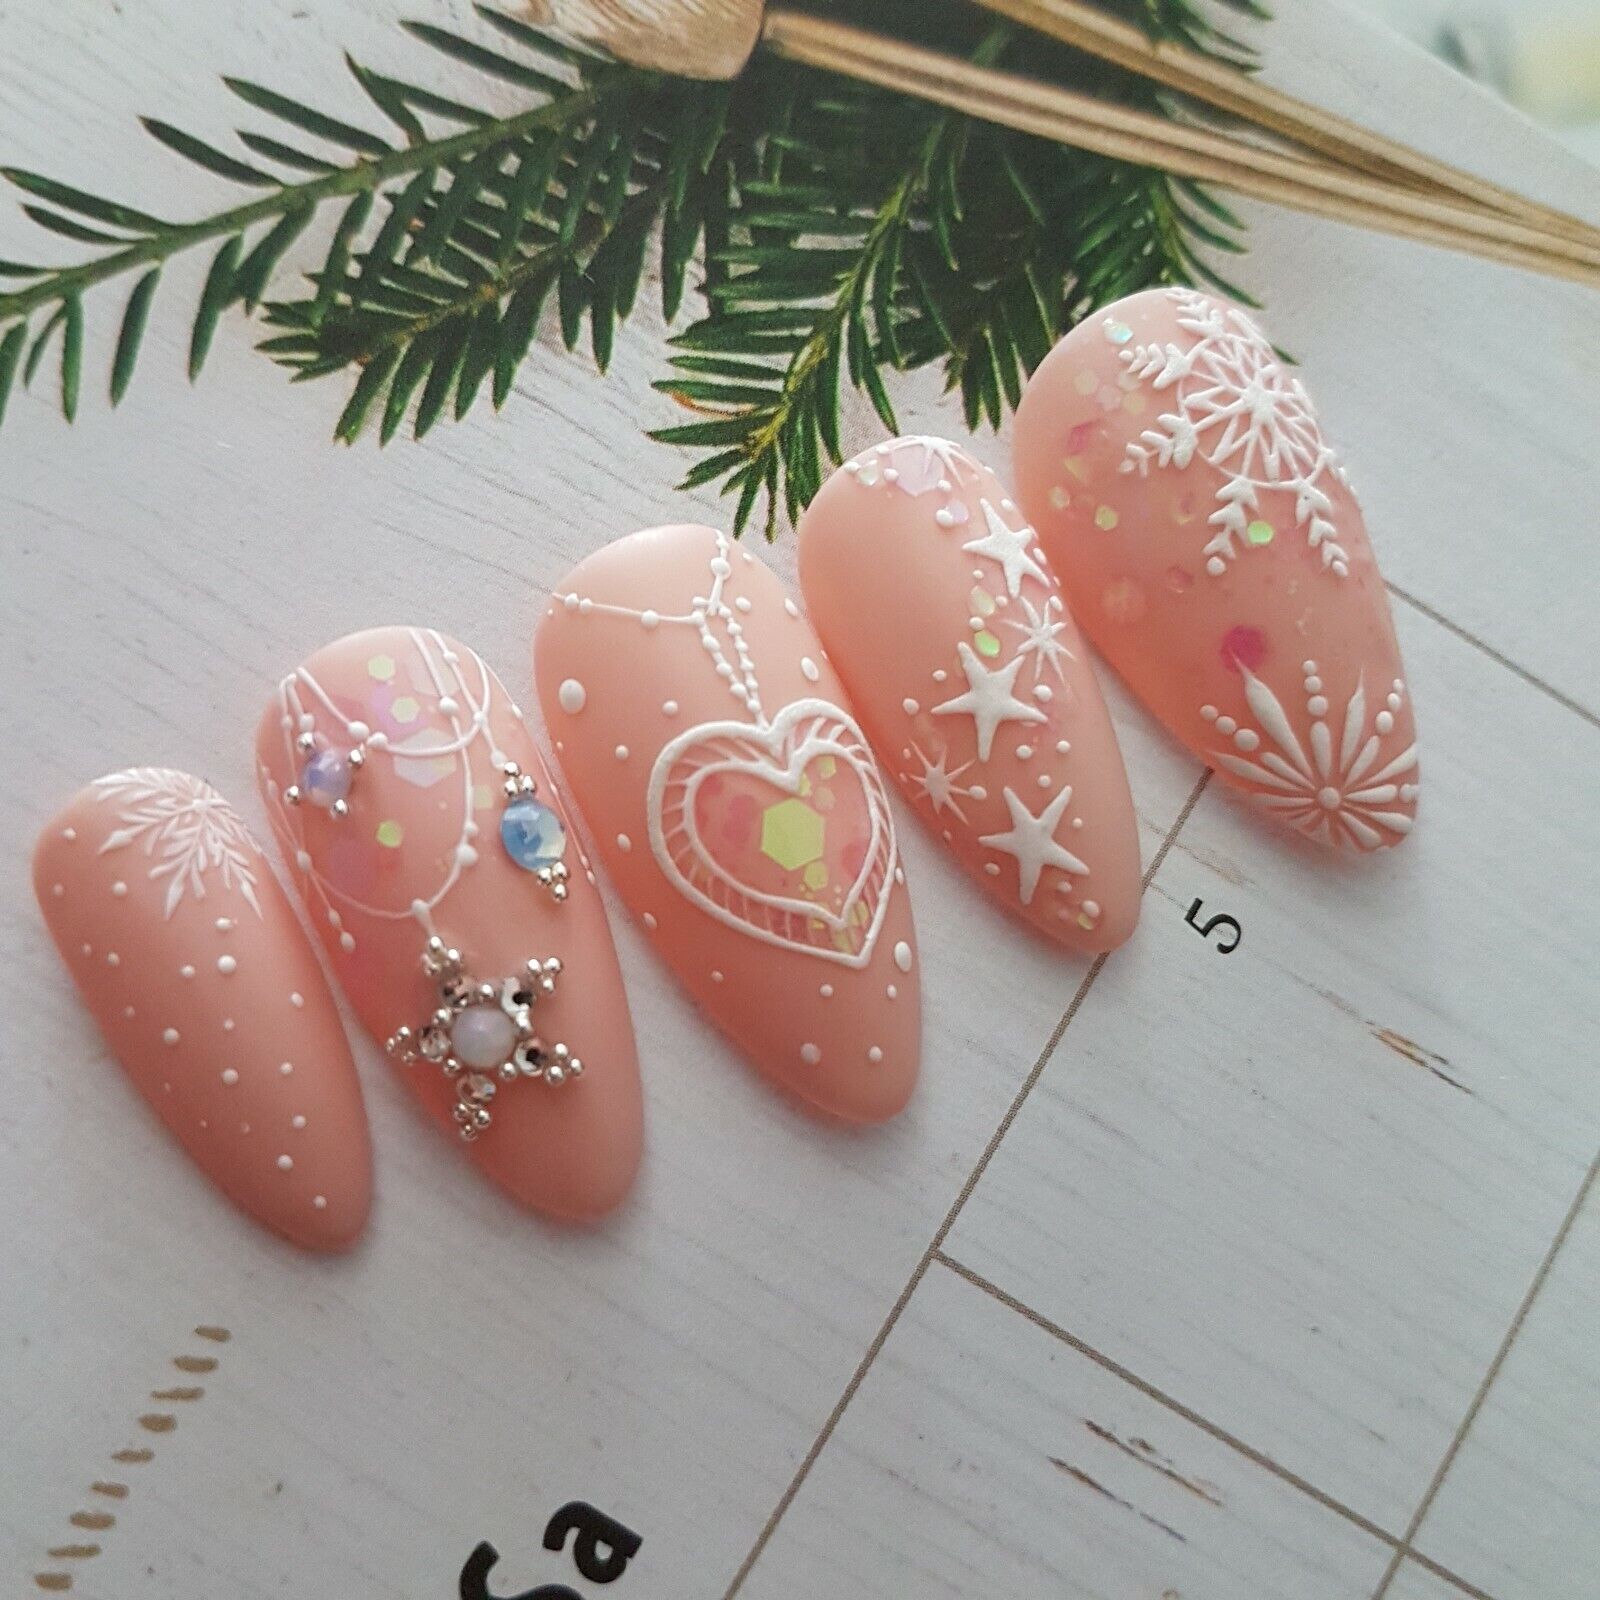 Christmas press on nails❄Nude nails❄Weihnachtliche Nägel❄Winter nails❄Silvester 